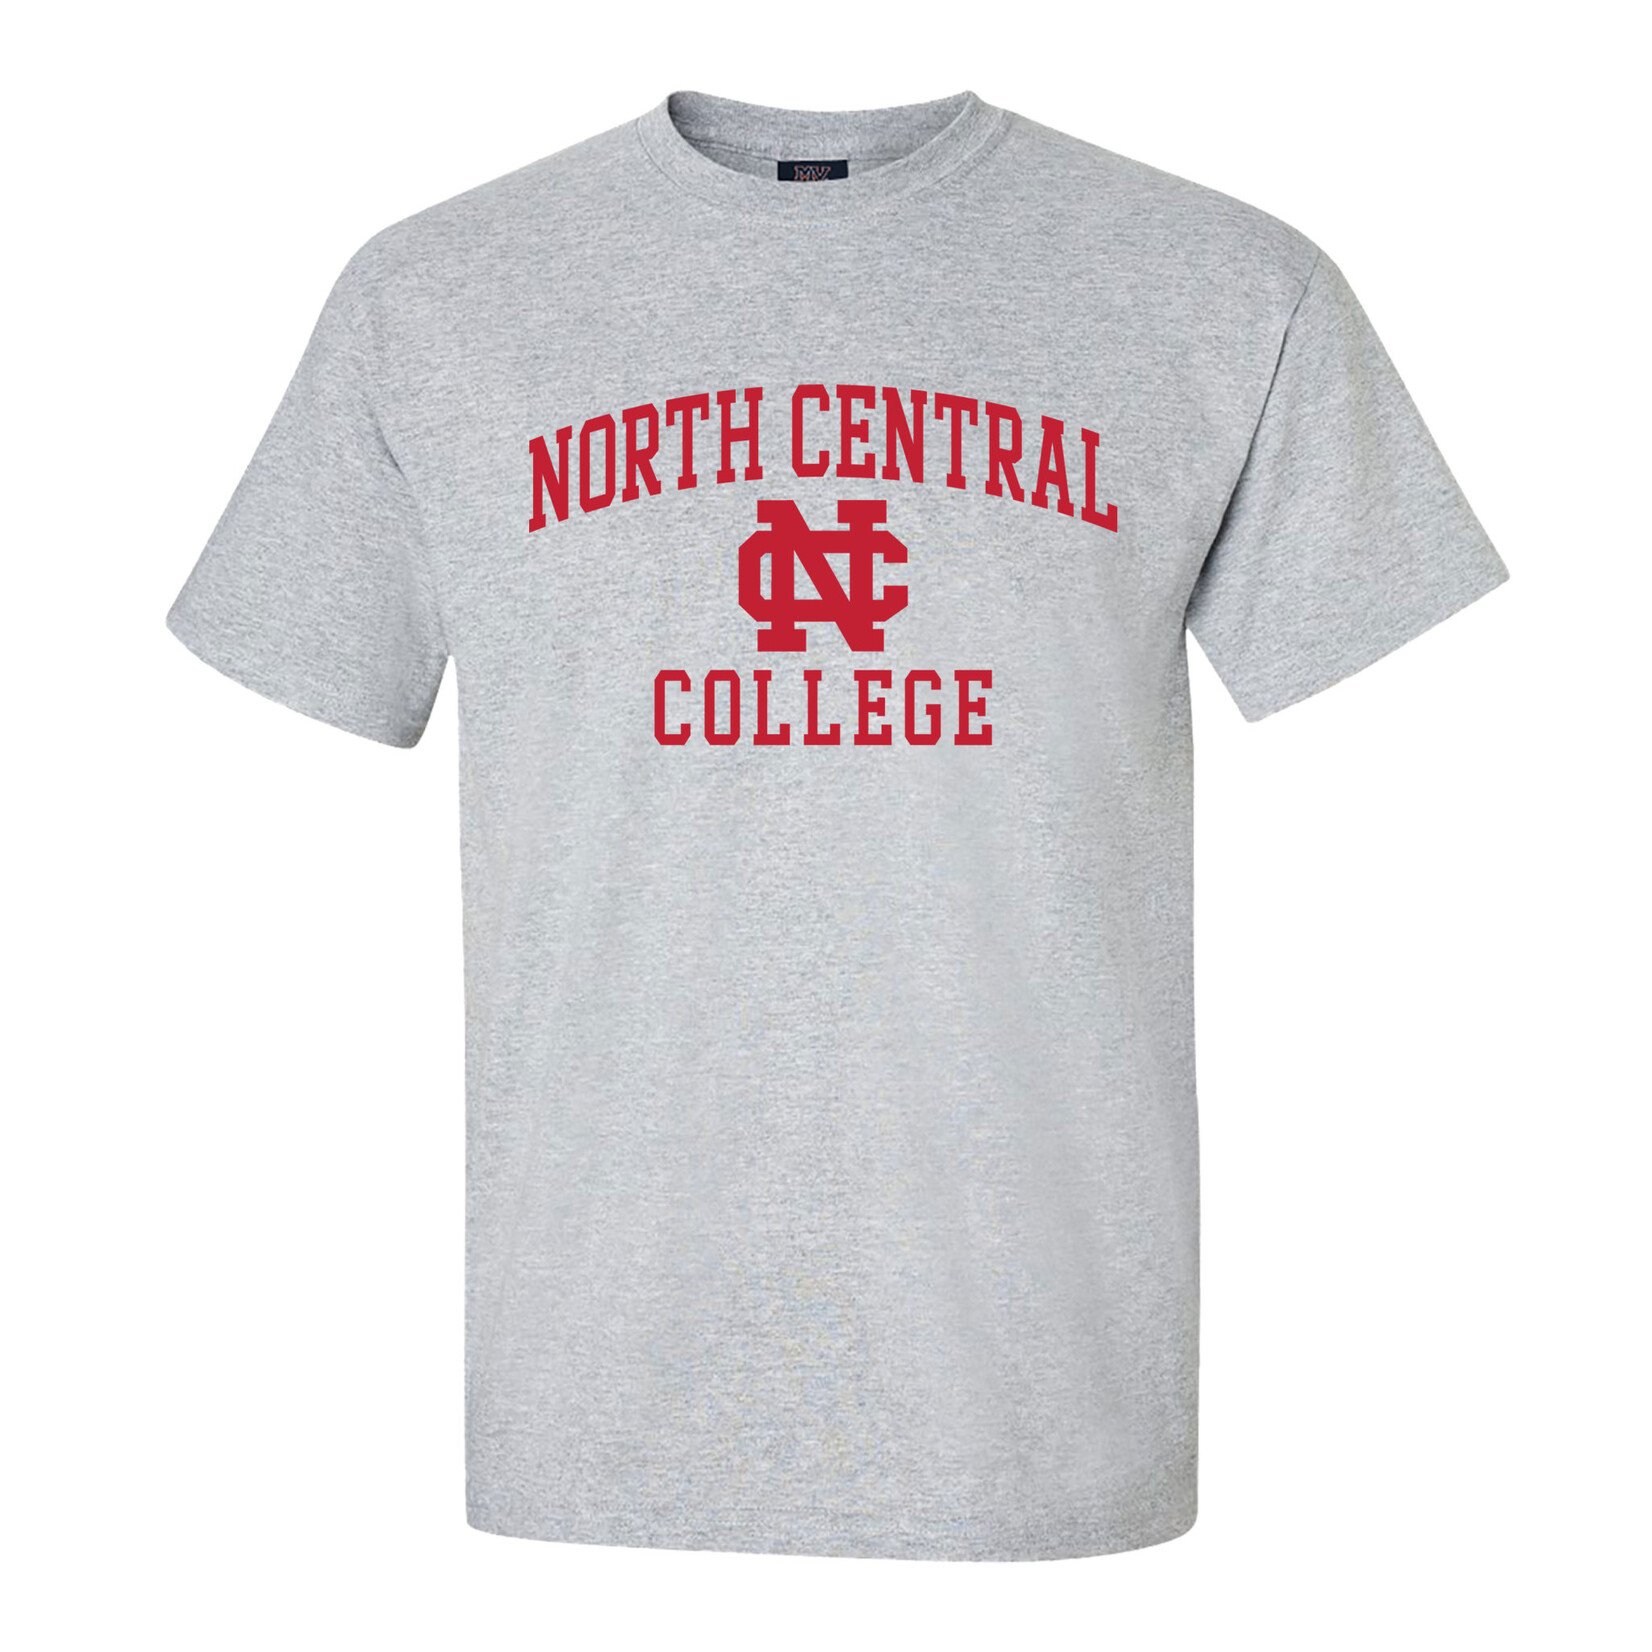 MV Sports North Central College 100% Cotton Classic Tee by MV